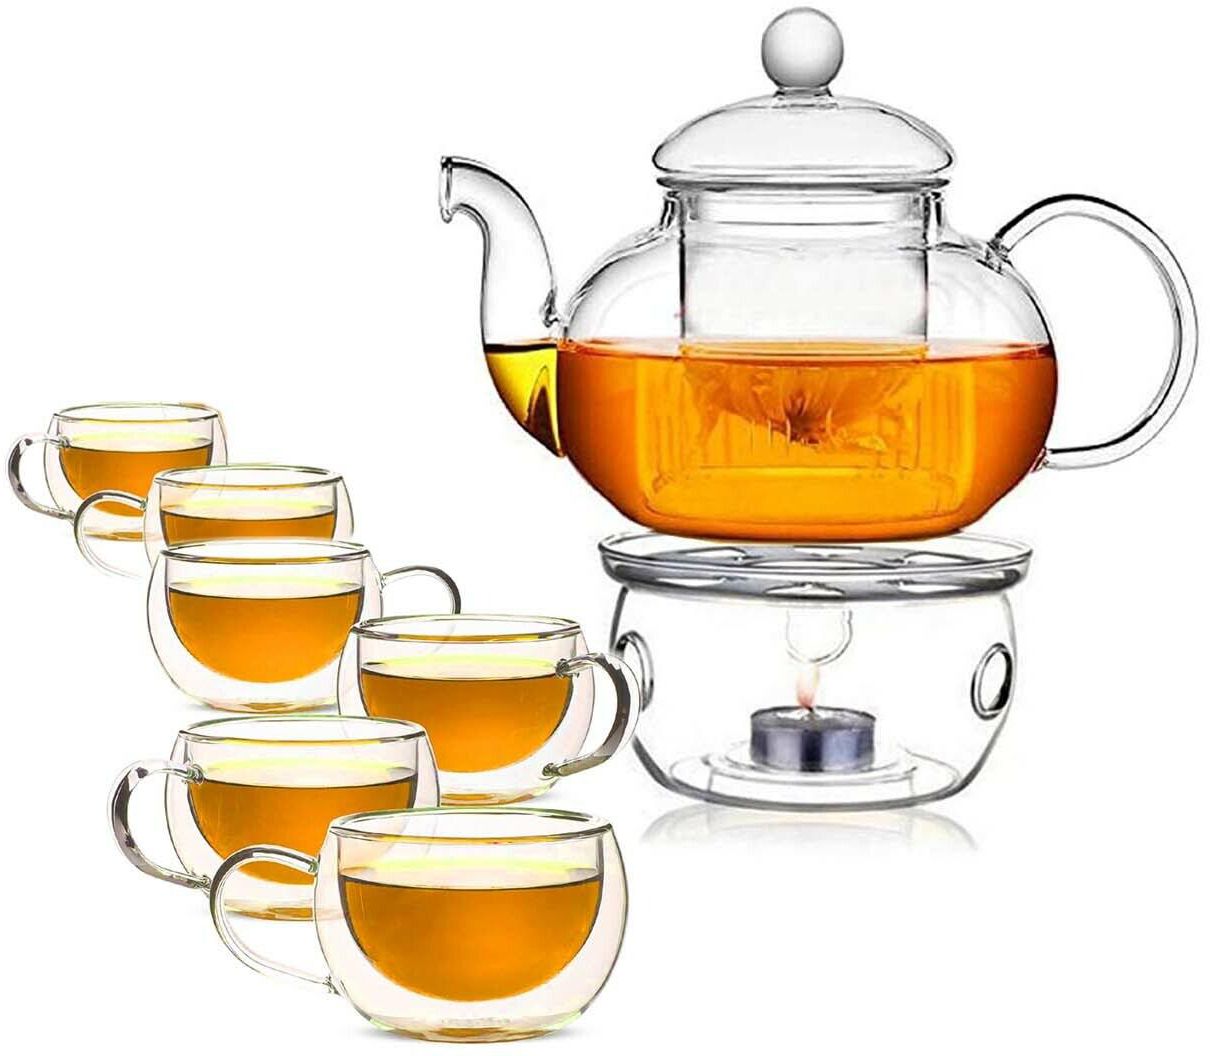 LIHAN Double Wall Glass Teapot Set Combined With  Teapot 1 x 600ml ,1 Candle Warmer , Coffee and Tea cup [6 x 60ml], Heat-resistant Stovetop Dishwasher Safe Teapot with Removable Filter ,Blooming and